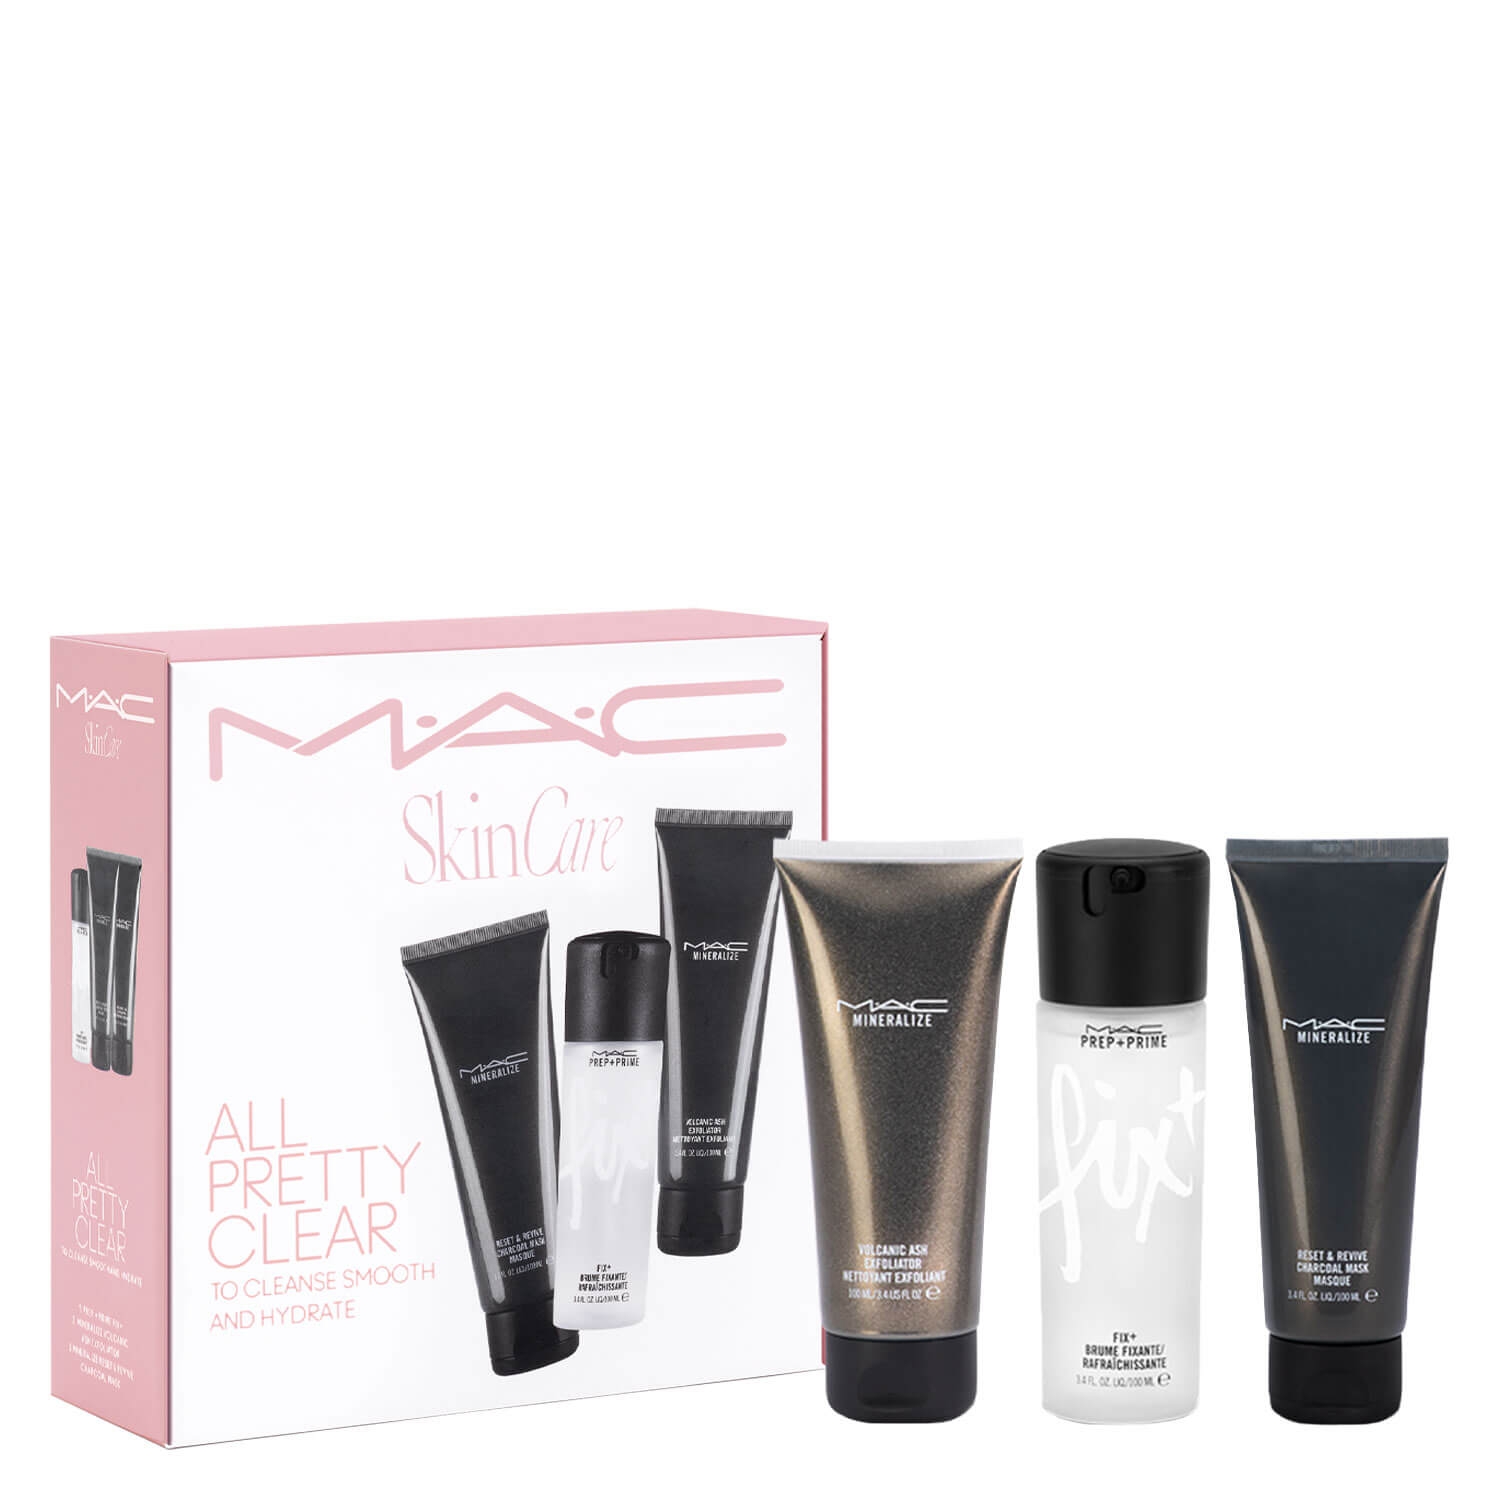 Product image from M·A·C Specials - All Pretty Clear Kit